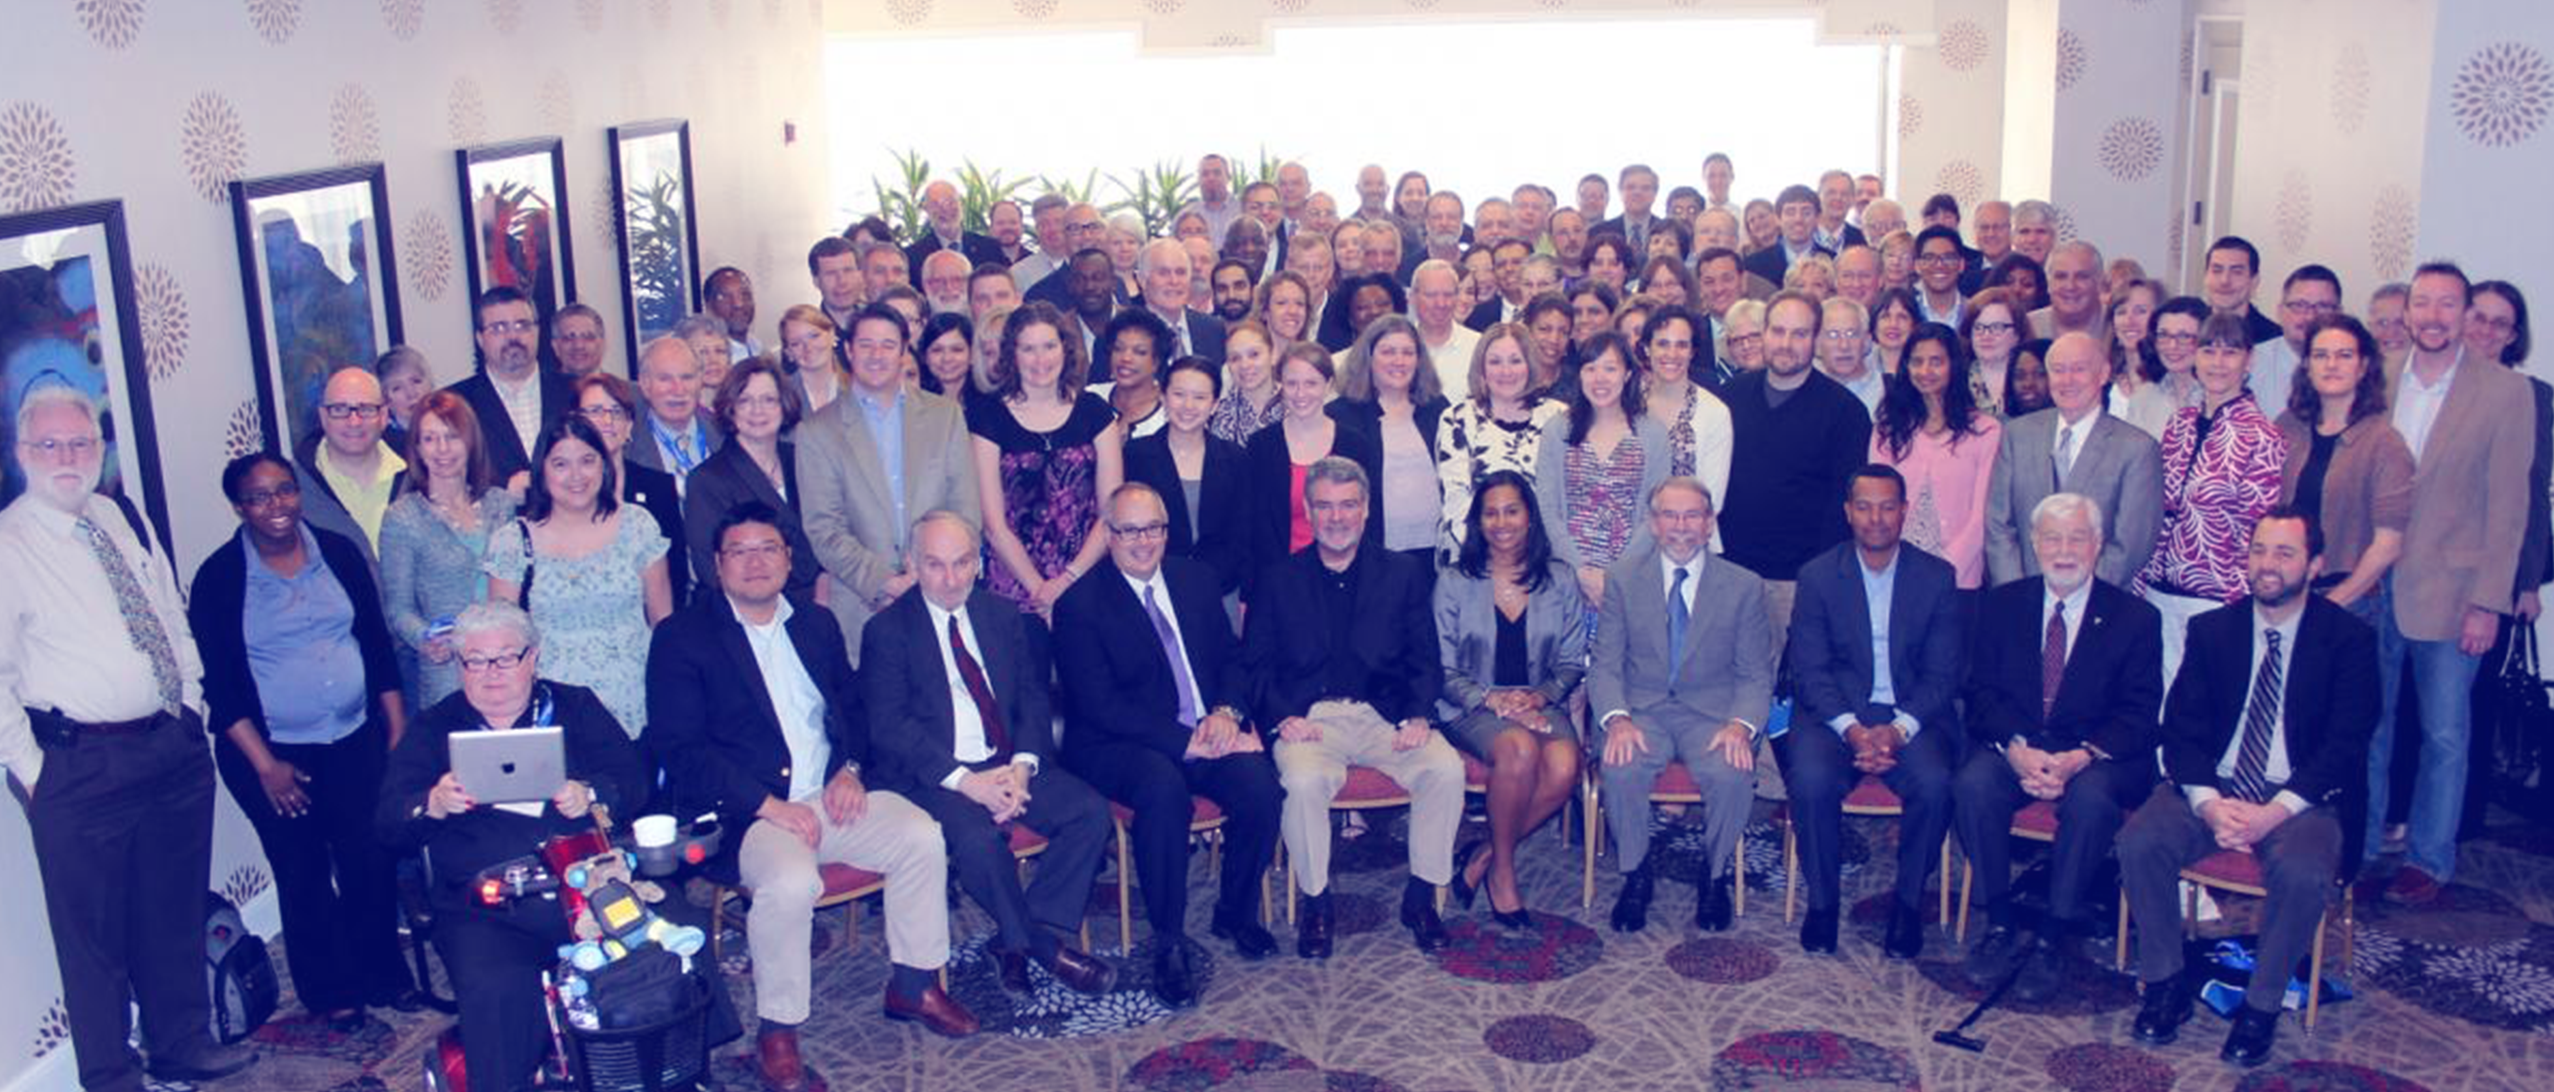 2012 conference group photo